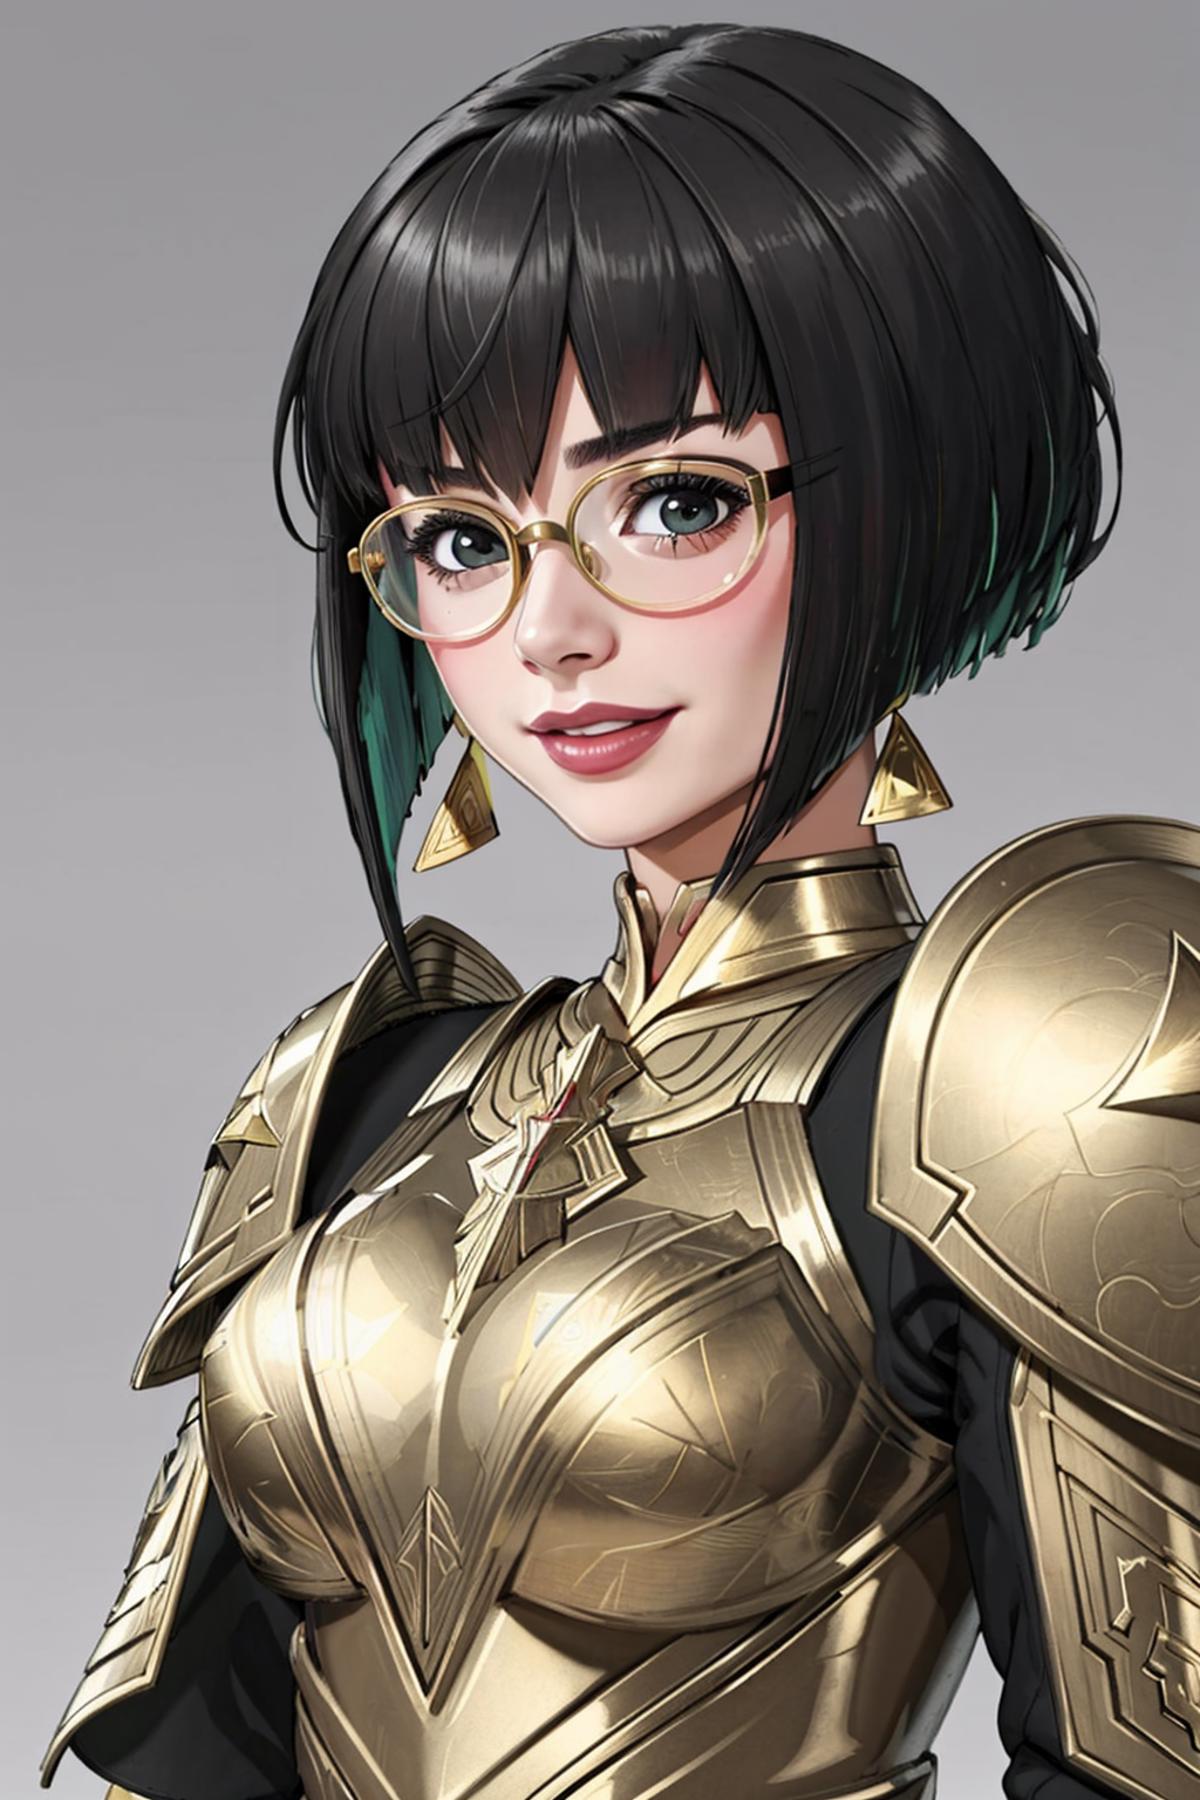 Drawing of a girl with glasses wearing a costume.